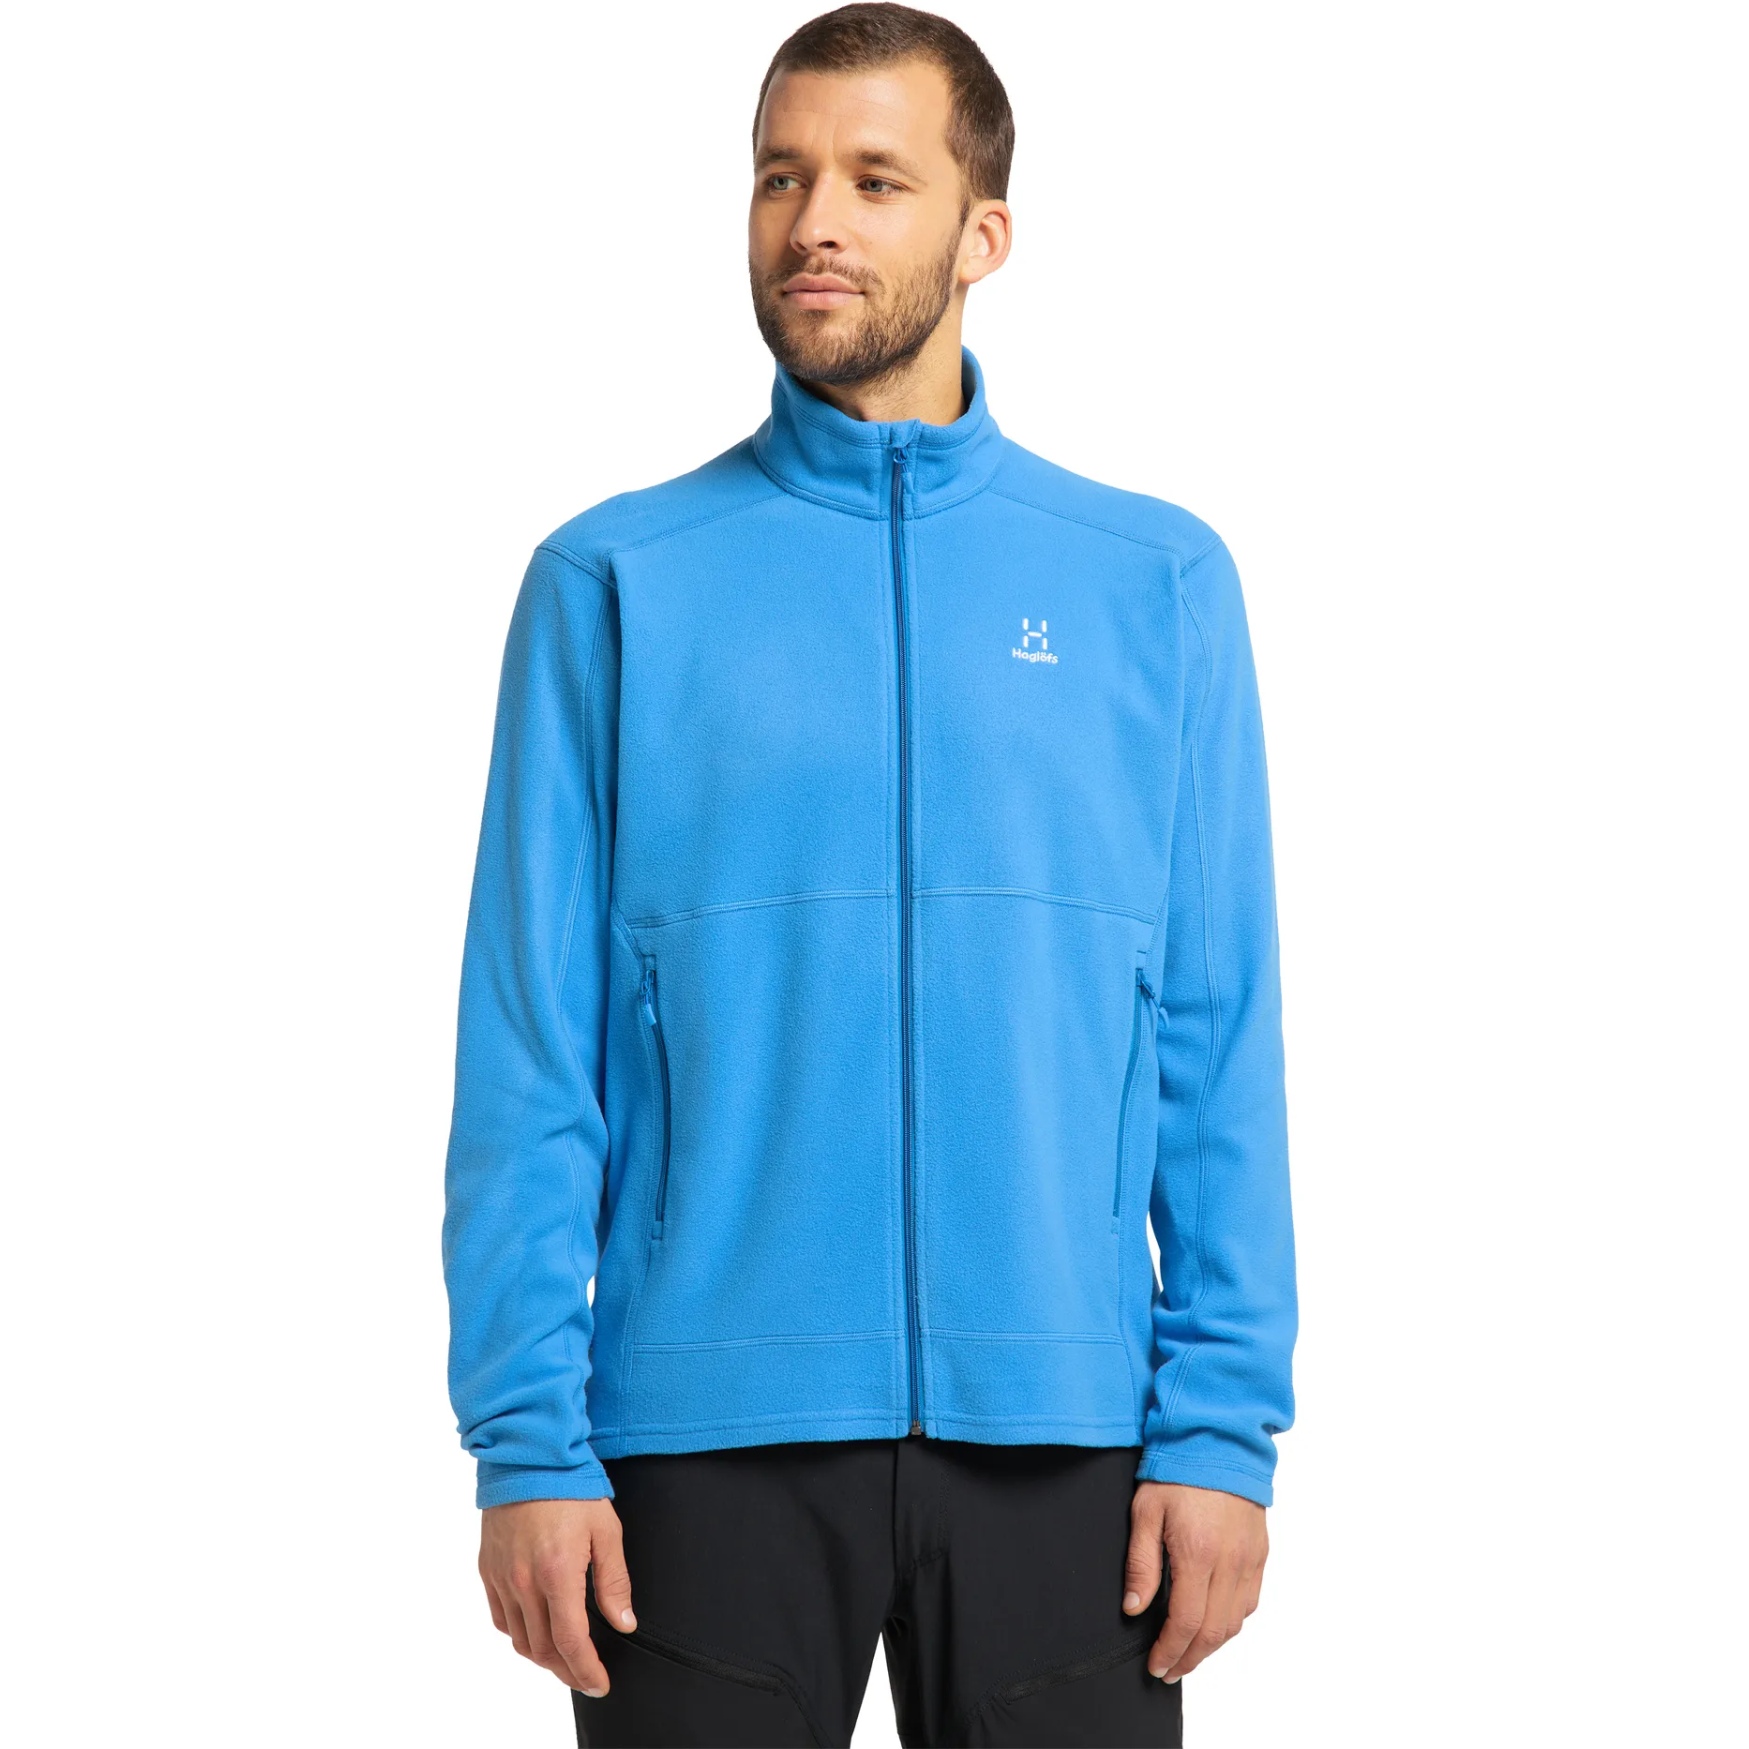 Picture of Haglöfs Buteo Mid Jacket - nordic blue 4Q6